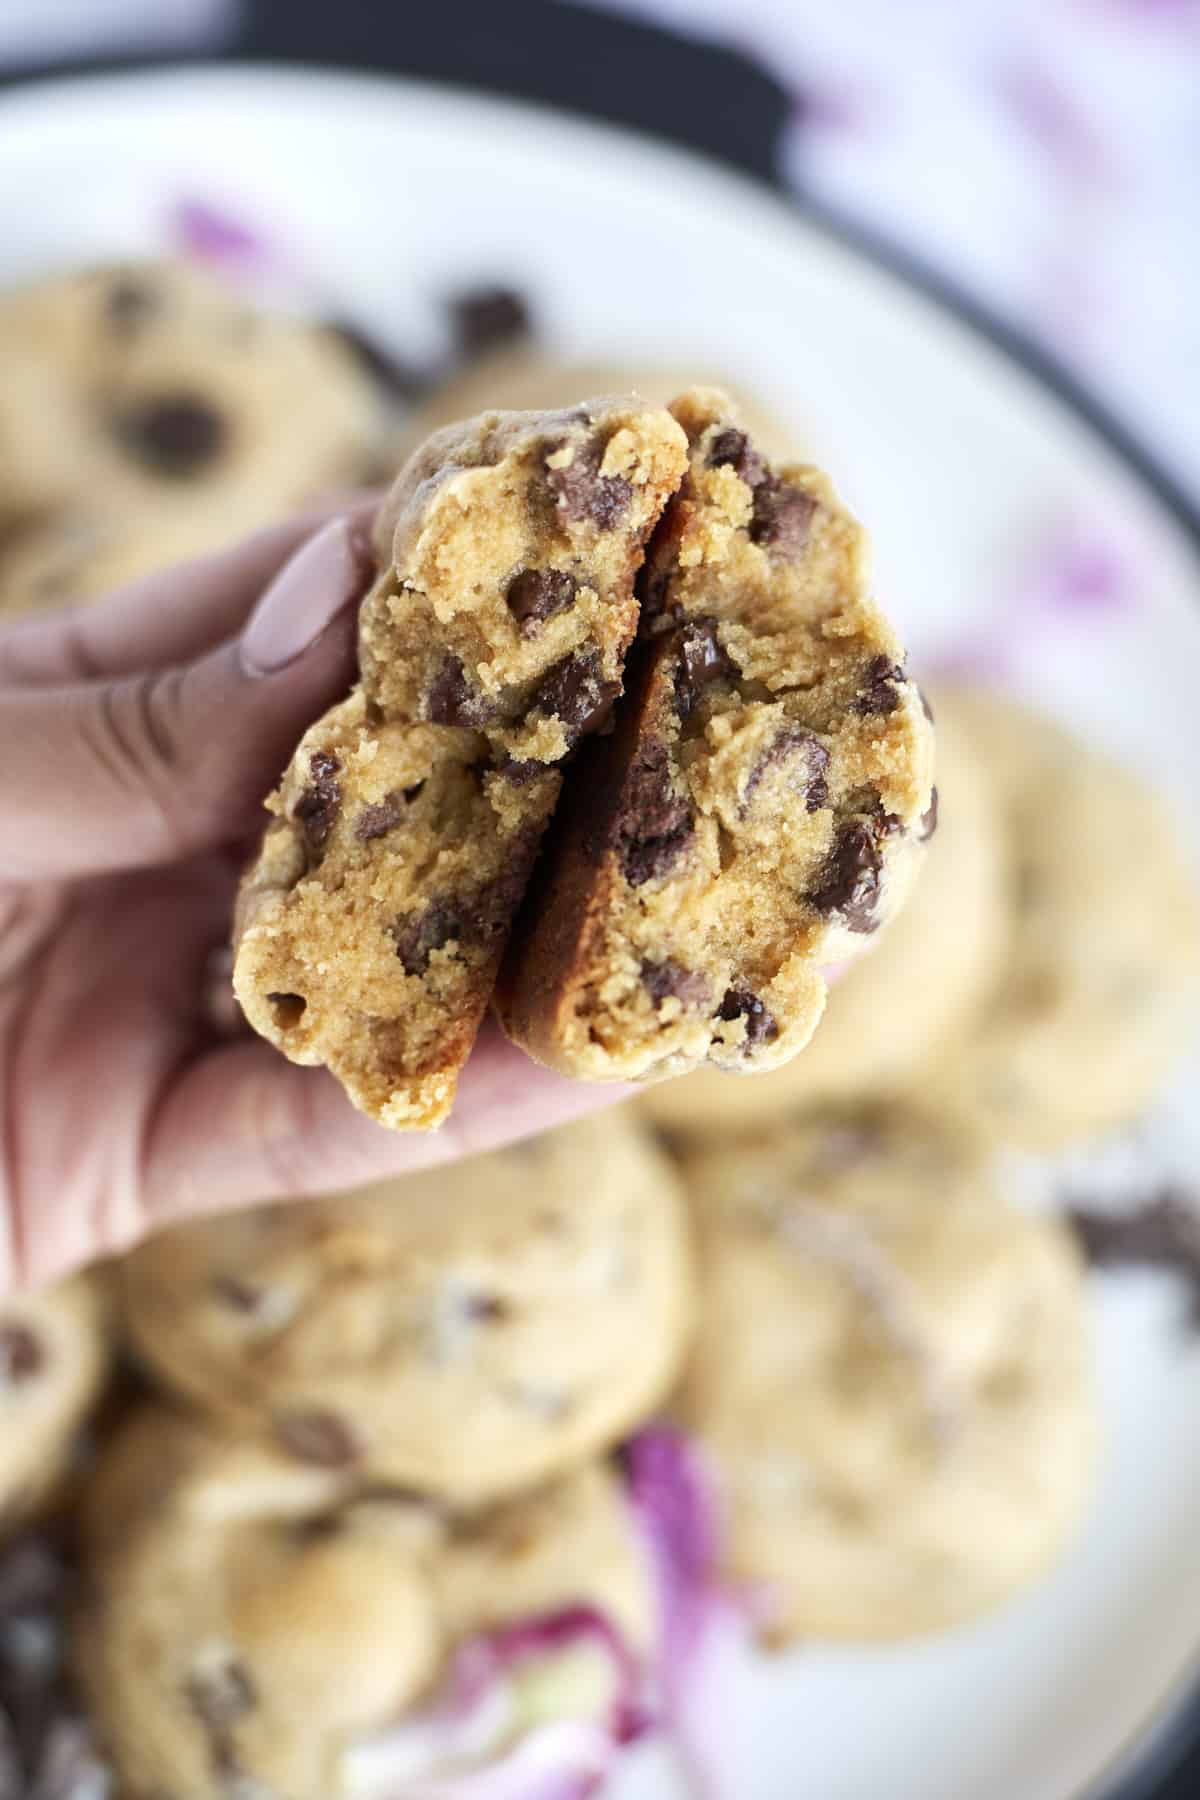 a hand holding two halves of a peanut butter chocolate chunk cookies showing the center